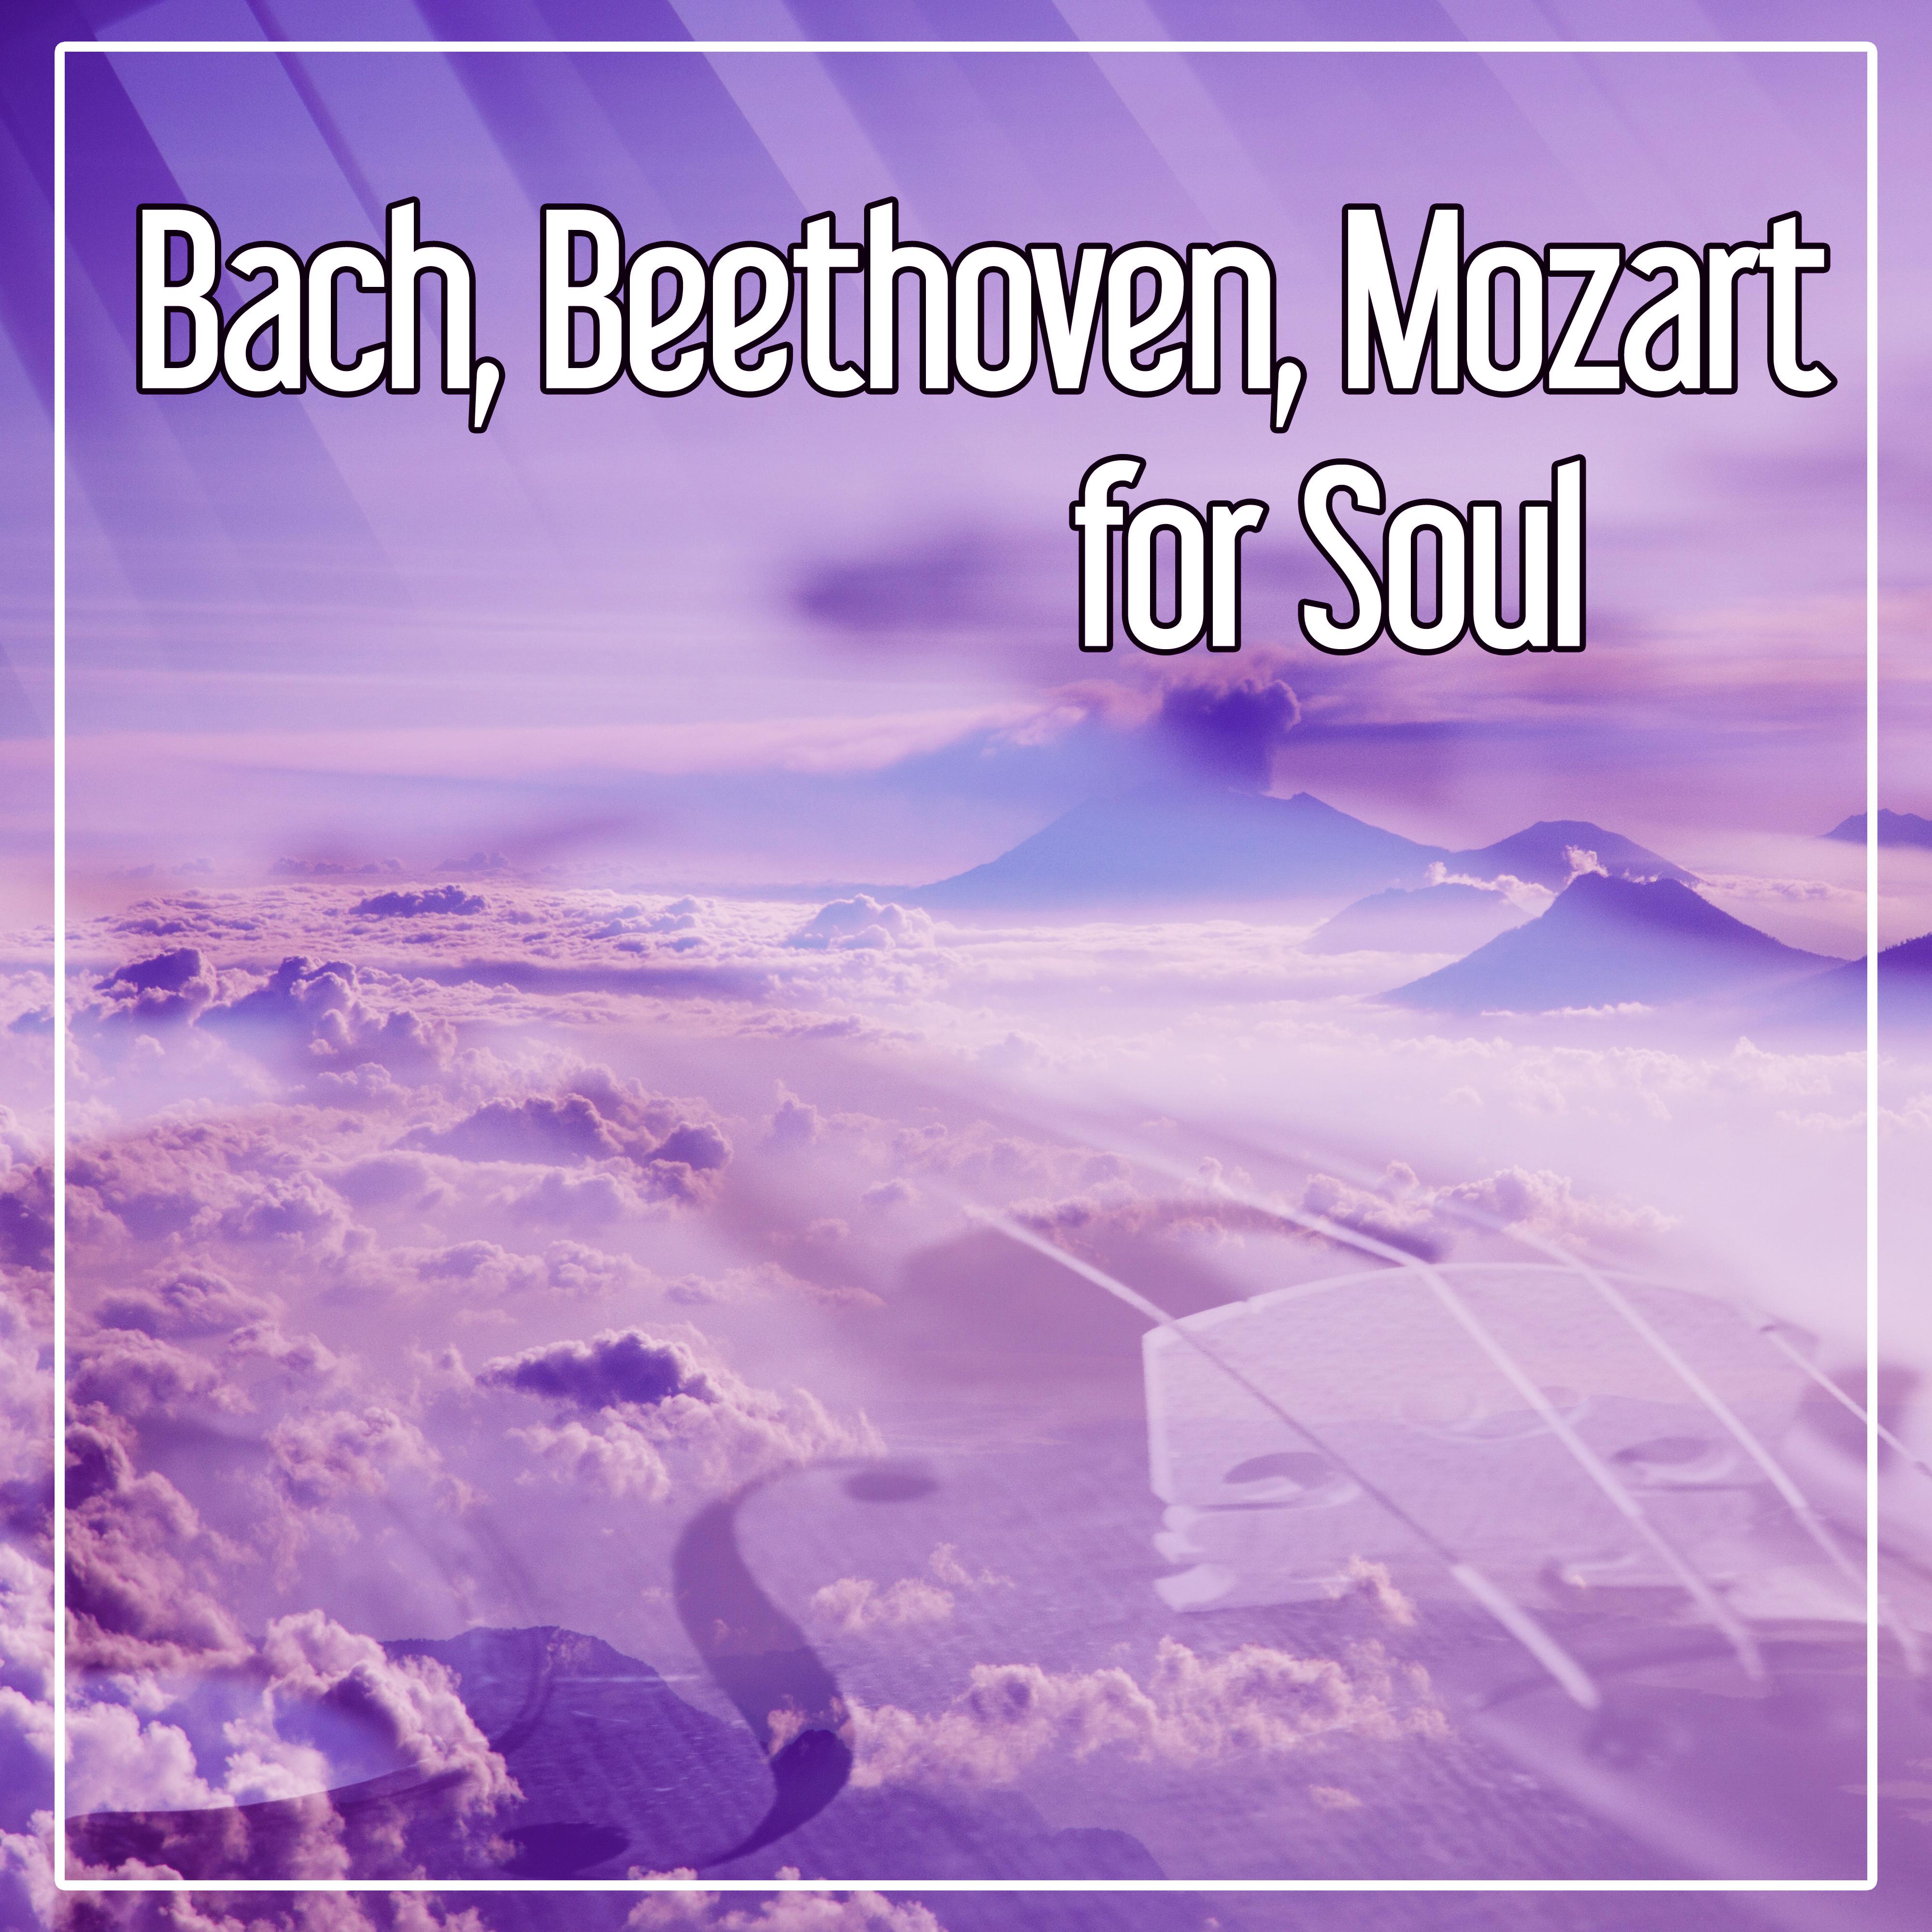 Bach, Beethoven, Mozart for Soul – Classical Music for Relaxation, Peaceful Music for You, Quiet Evening After Work